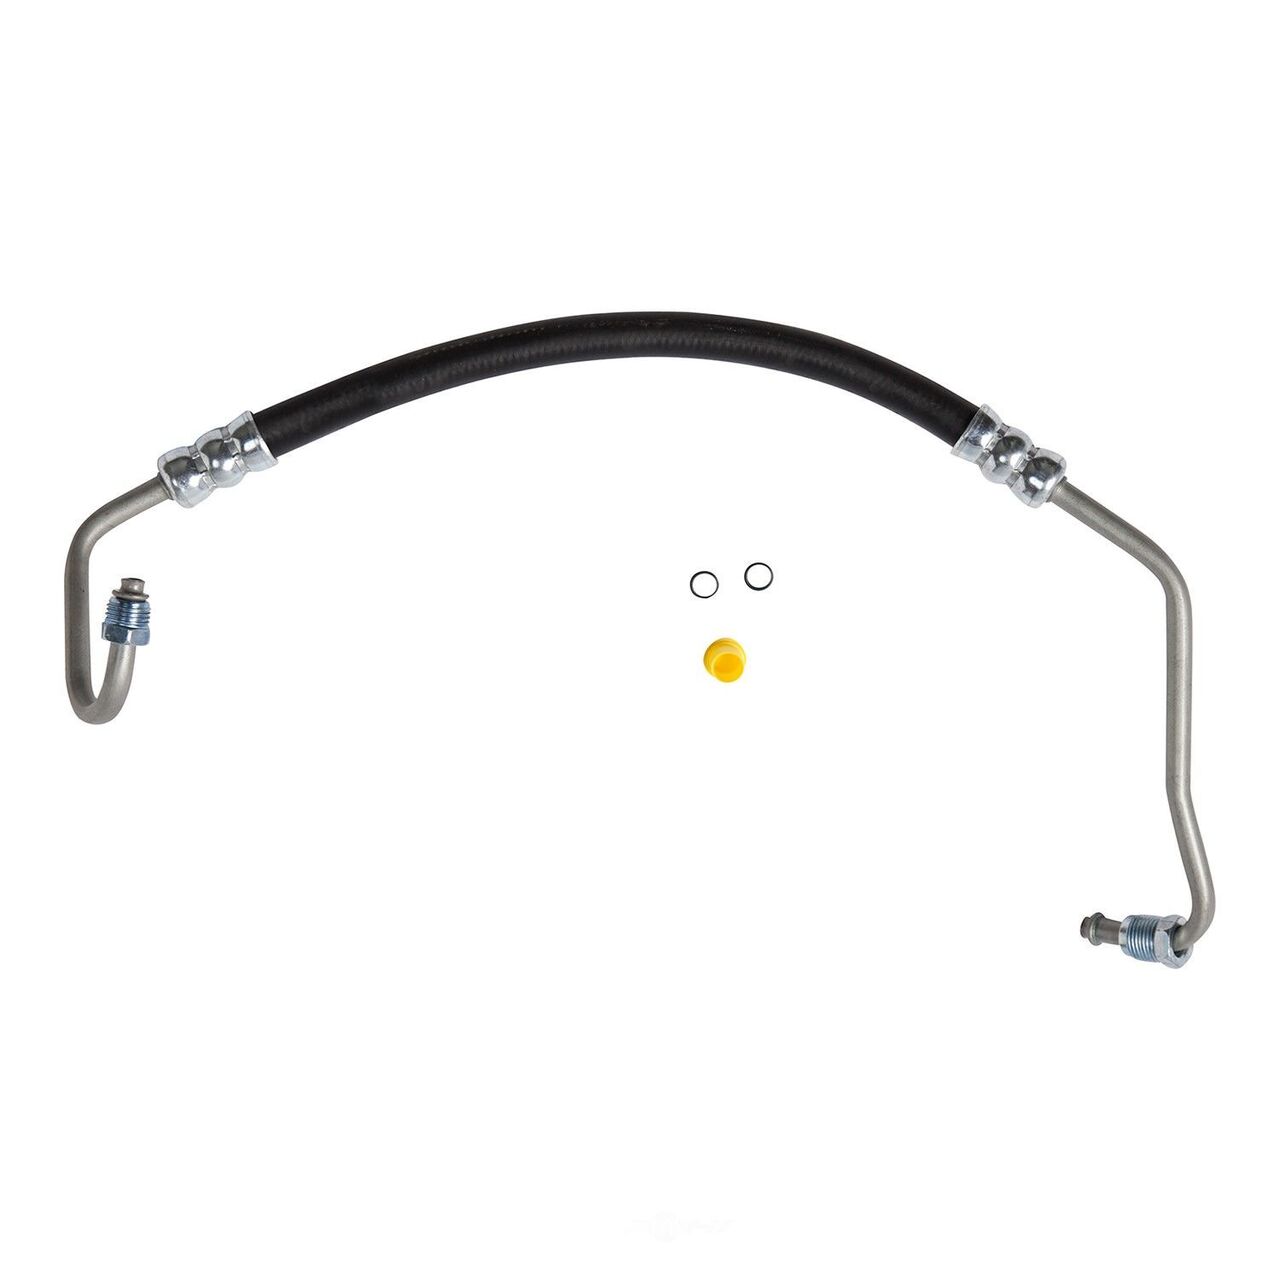 Details about   For Chevrolet C10 Suburban Power Steering Pressure Line Hose Assembly 78571TZ 